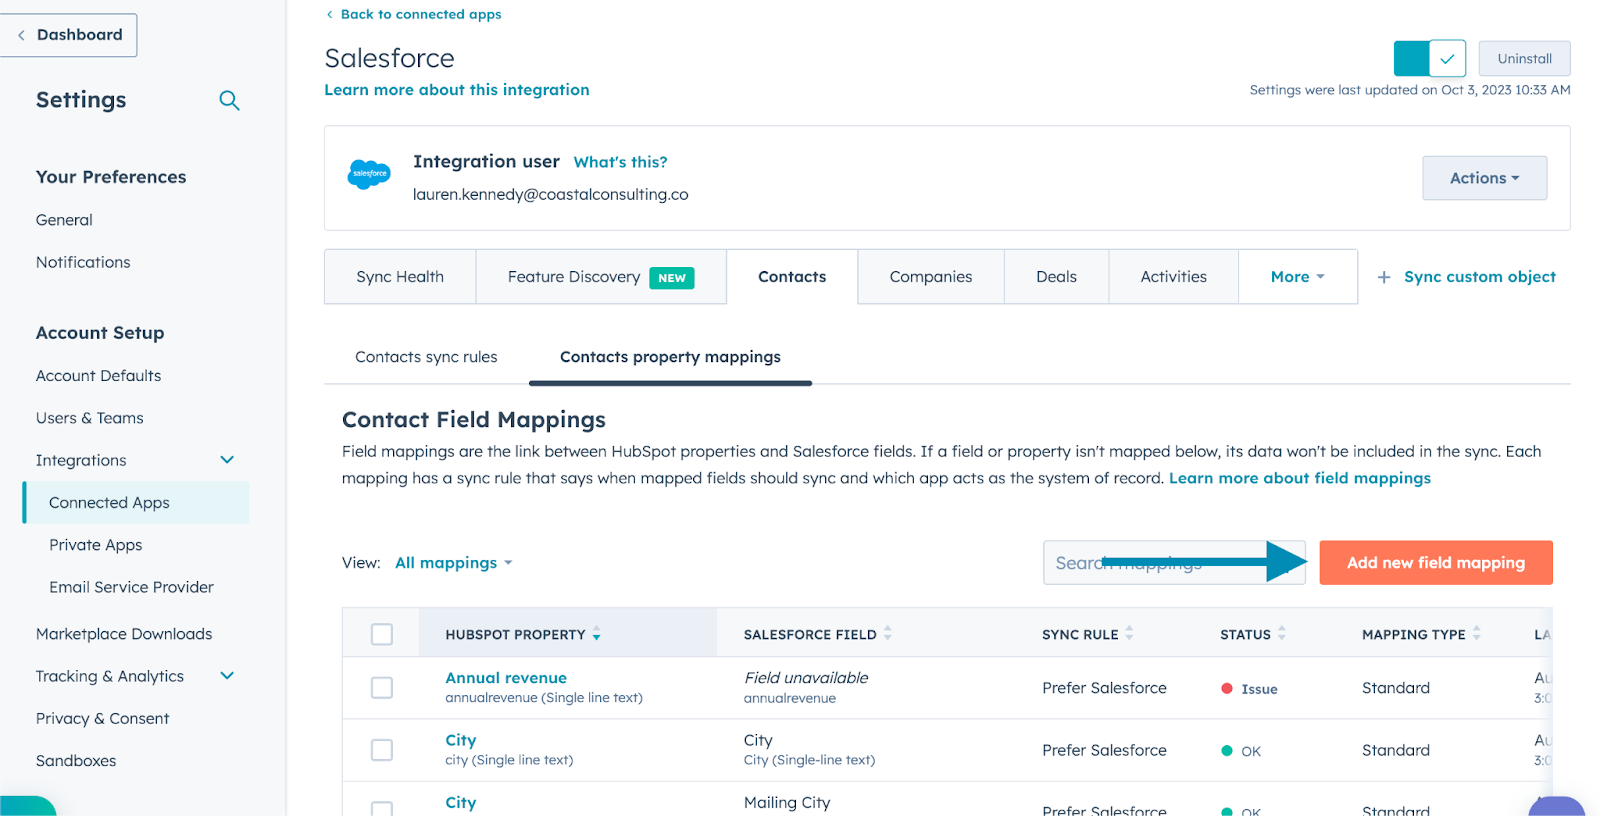 Adding a new field mapping to the HubSpot Salesforce integration